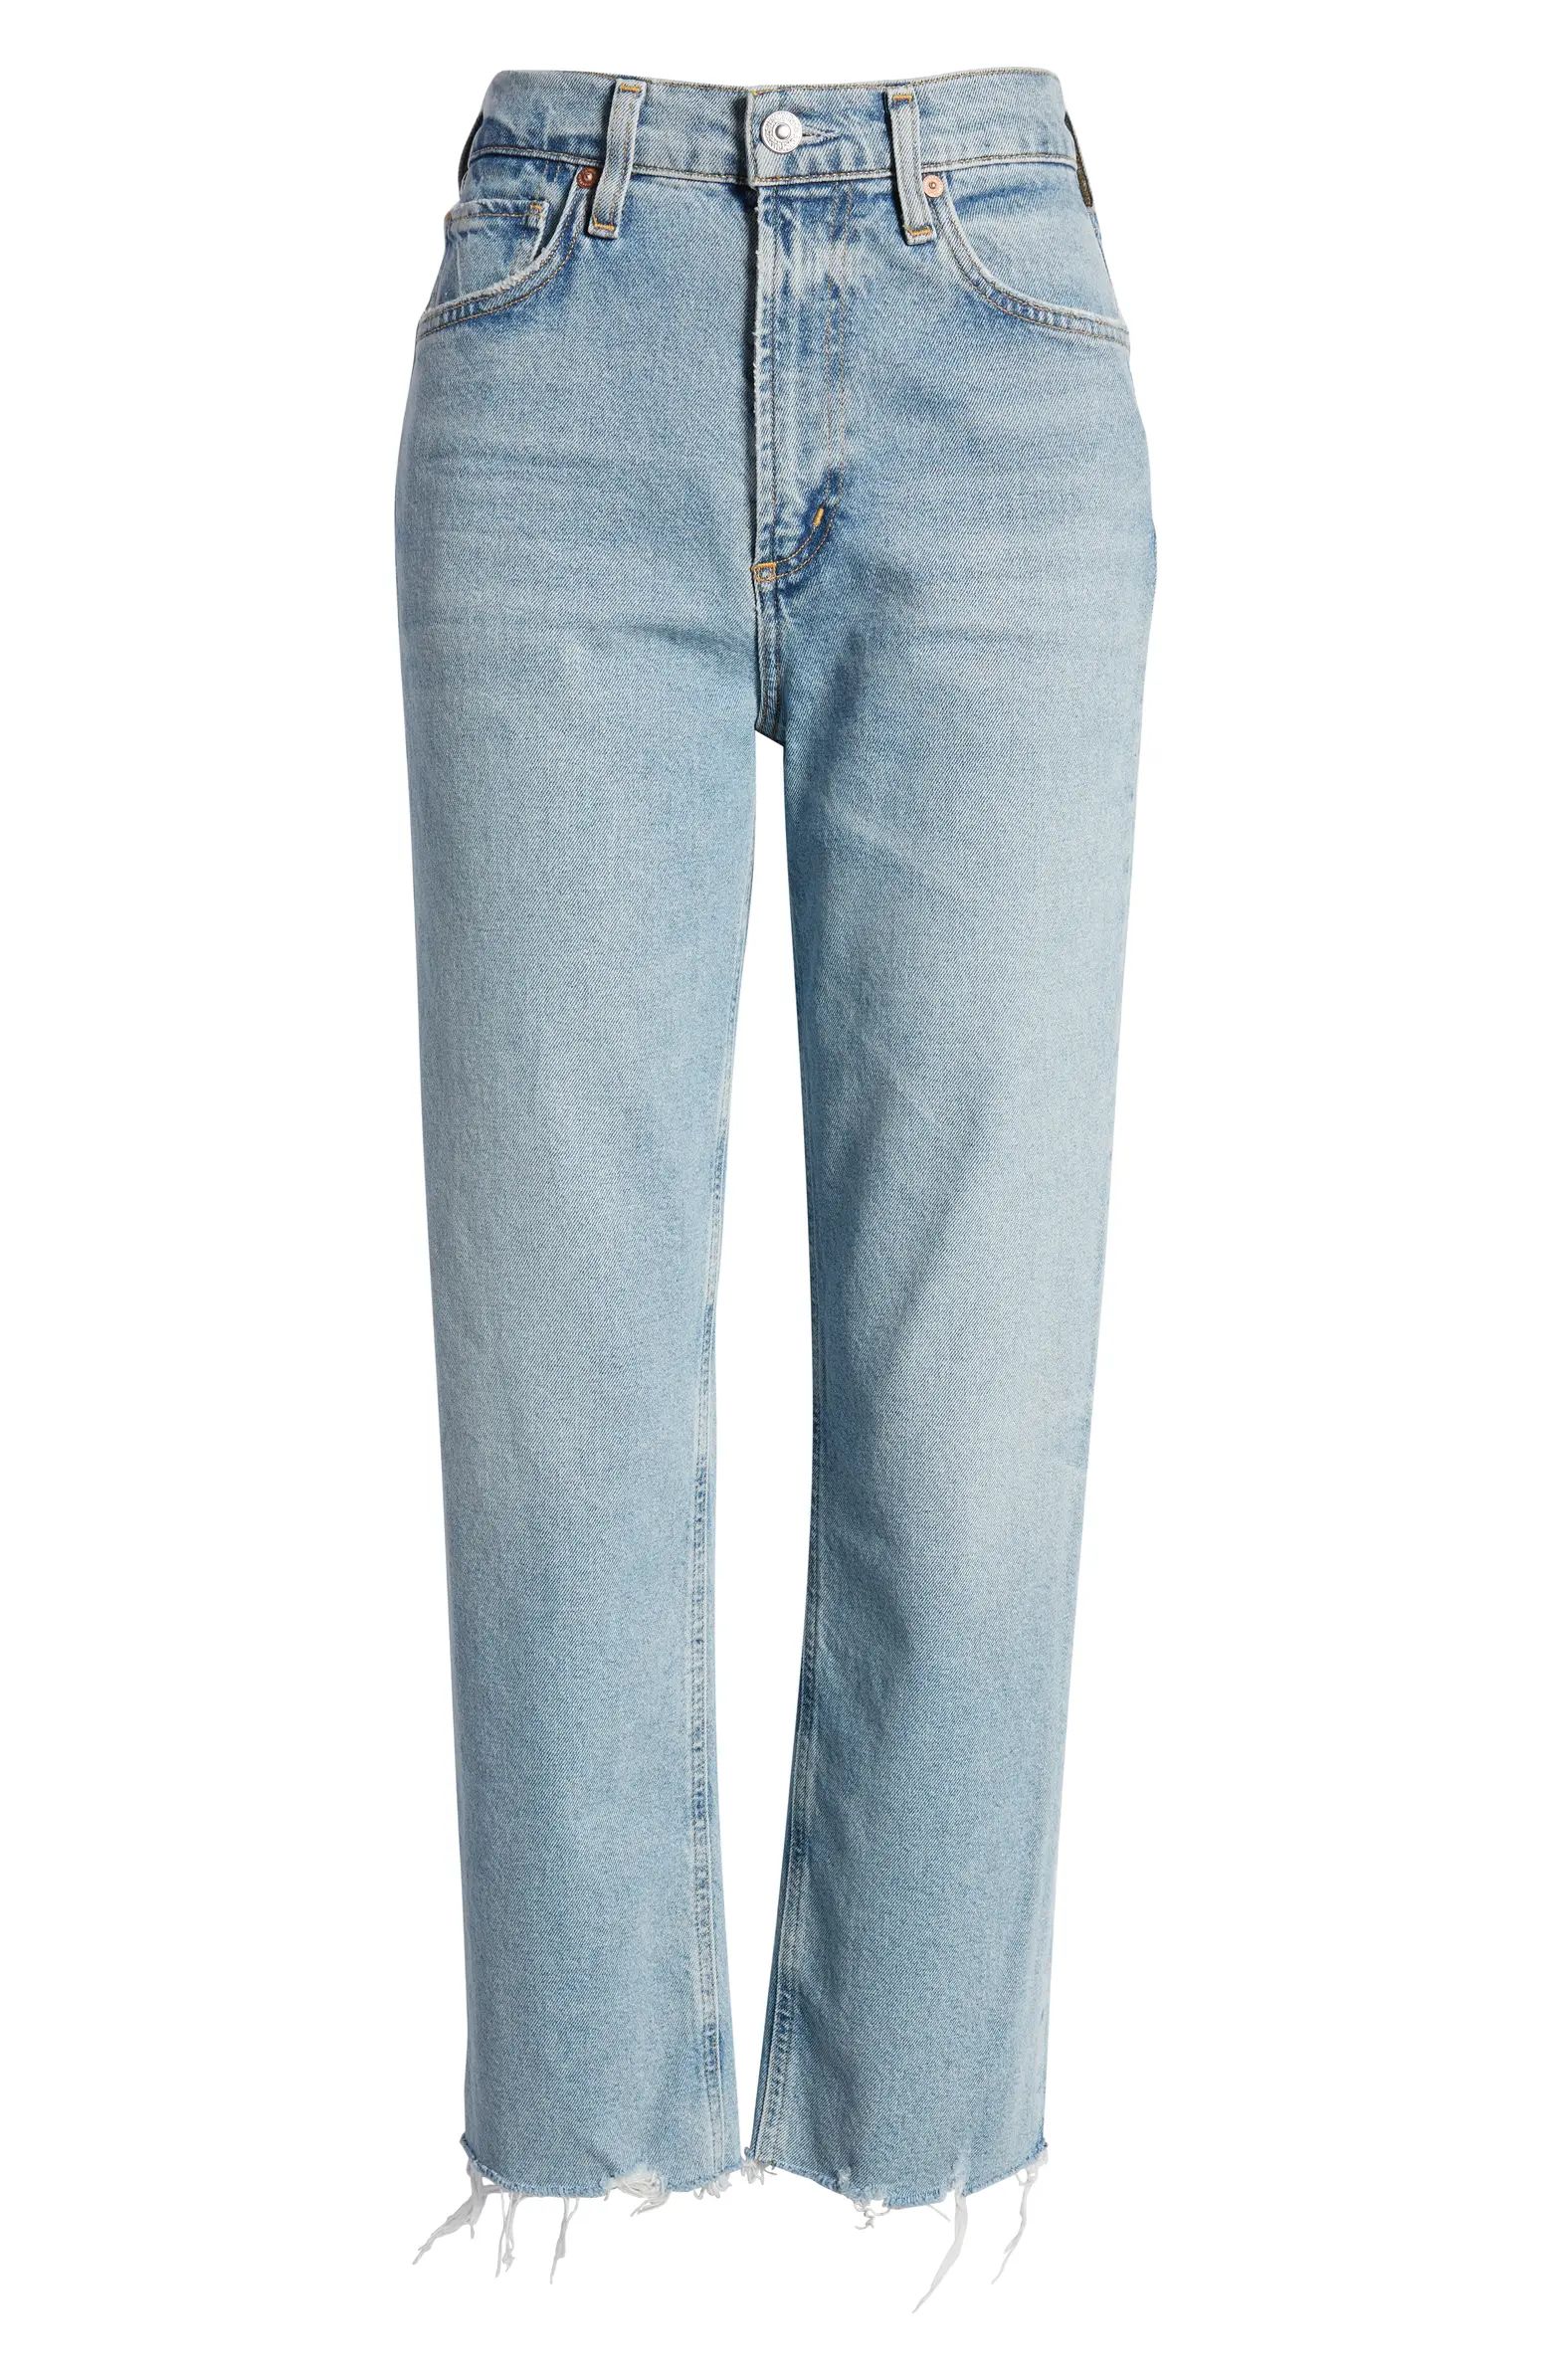 Citizens of Humanity Daphne High Waist Raw Hem Crop Stovepipe Jeans | Nordstrom | Nordstrom